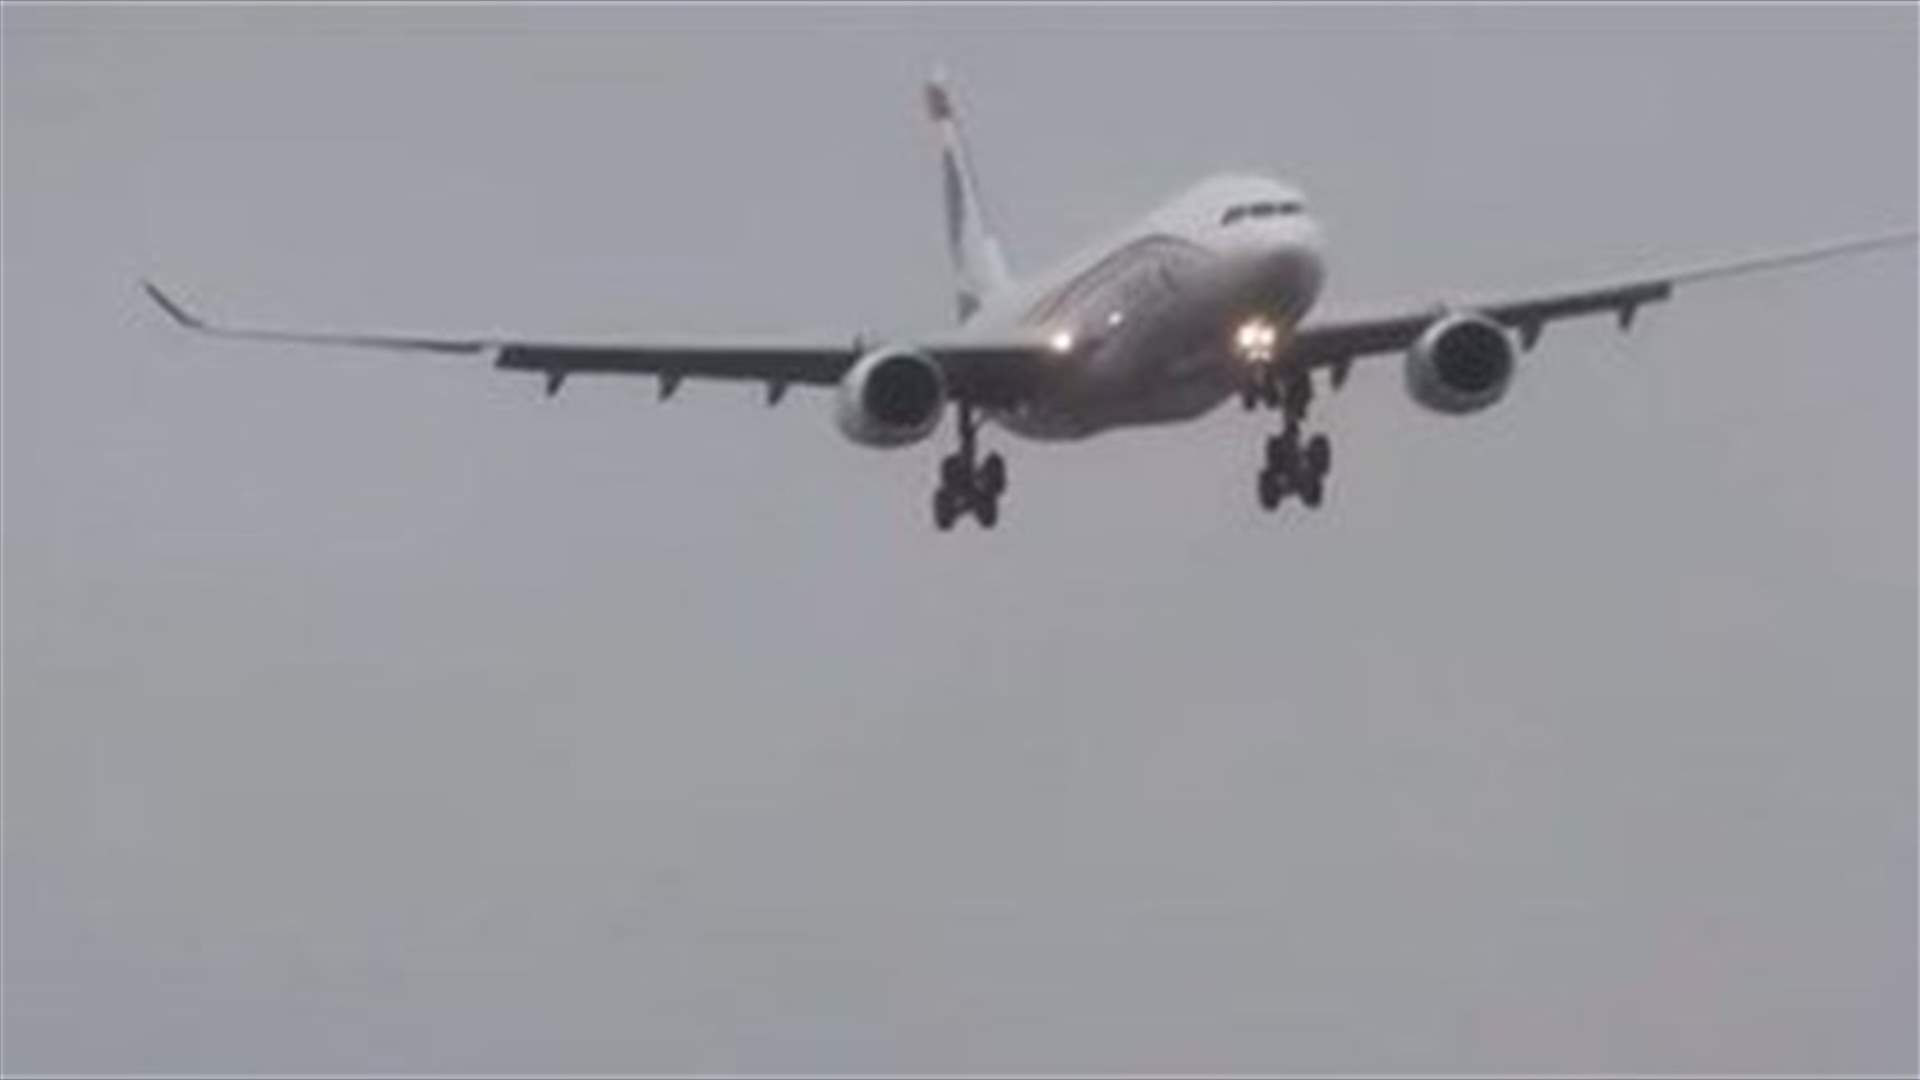 MEA pilot braves strong winds, lands safely at Heathrow airport-[VIDEO]